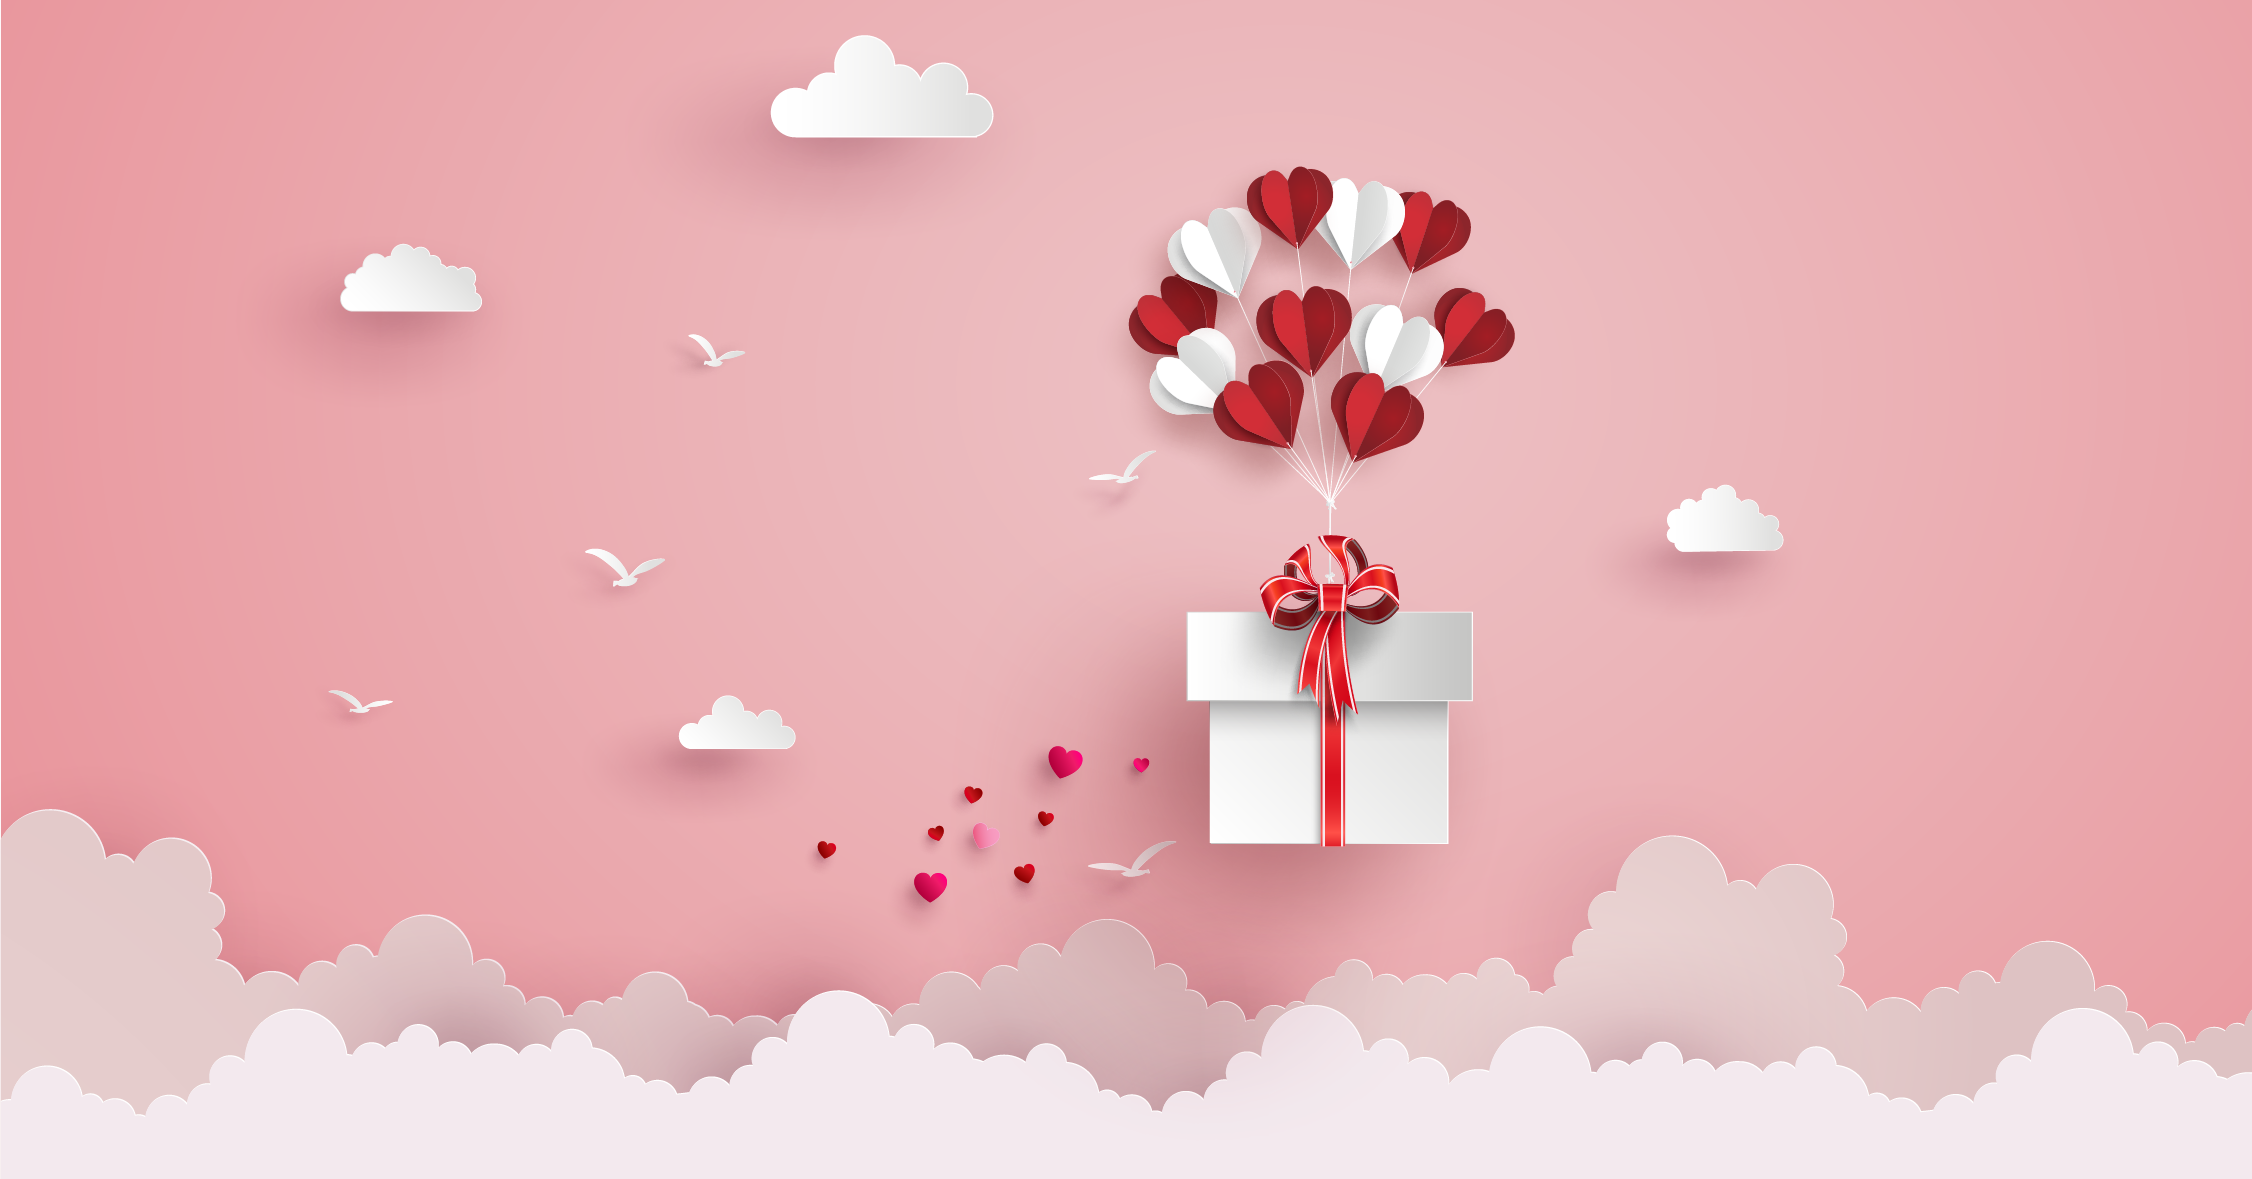 A gift box with a bouquet of balloons tied to it floats in a pink sky above fluffy white clouds